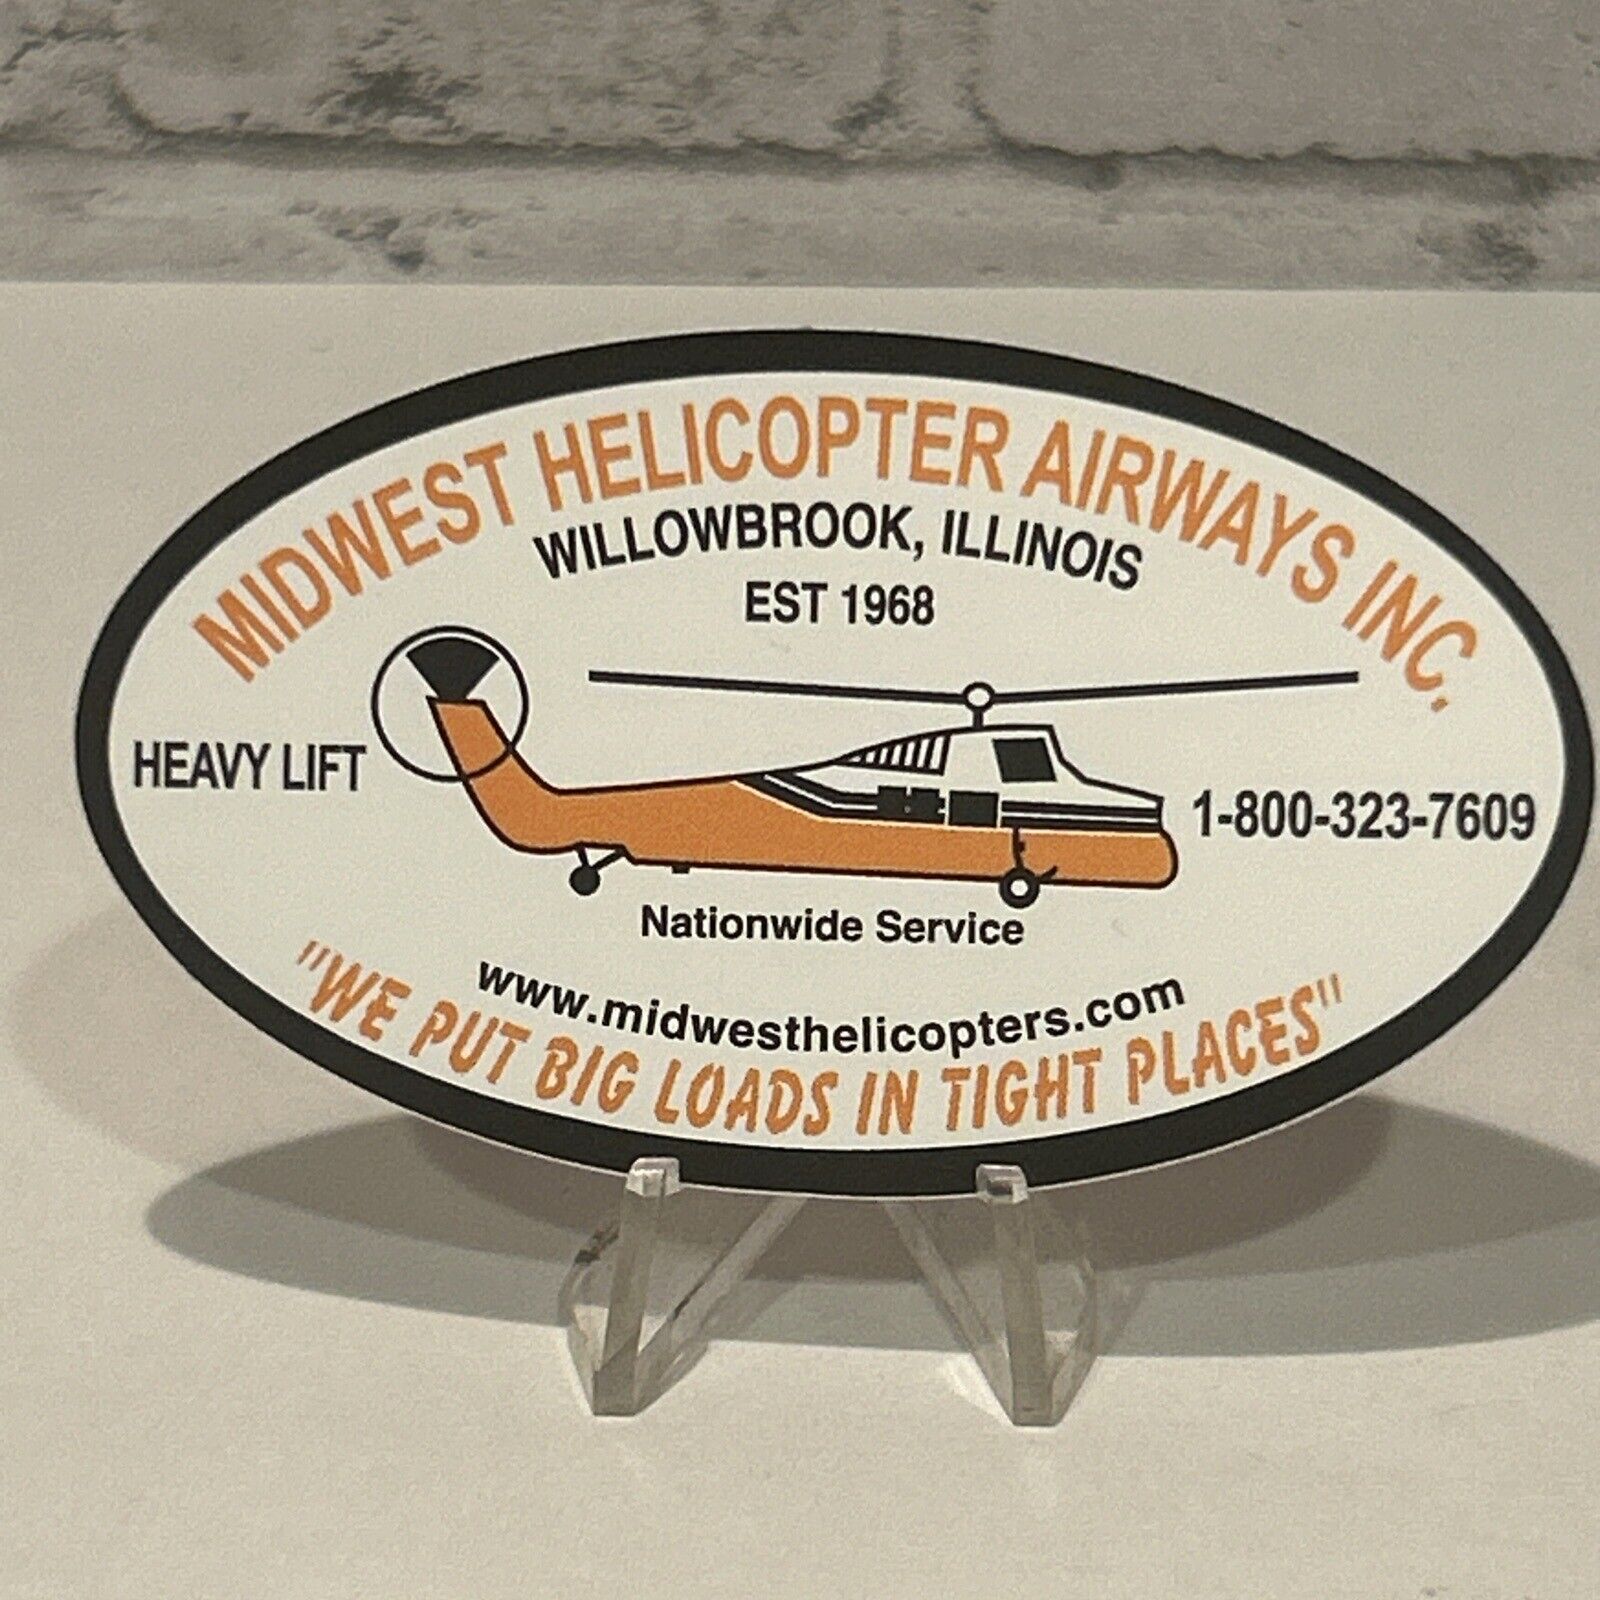 Midwest Helicopter Airways Inc Operating Engineers Hardhat Sticker Hard Hat